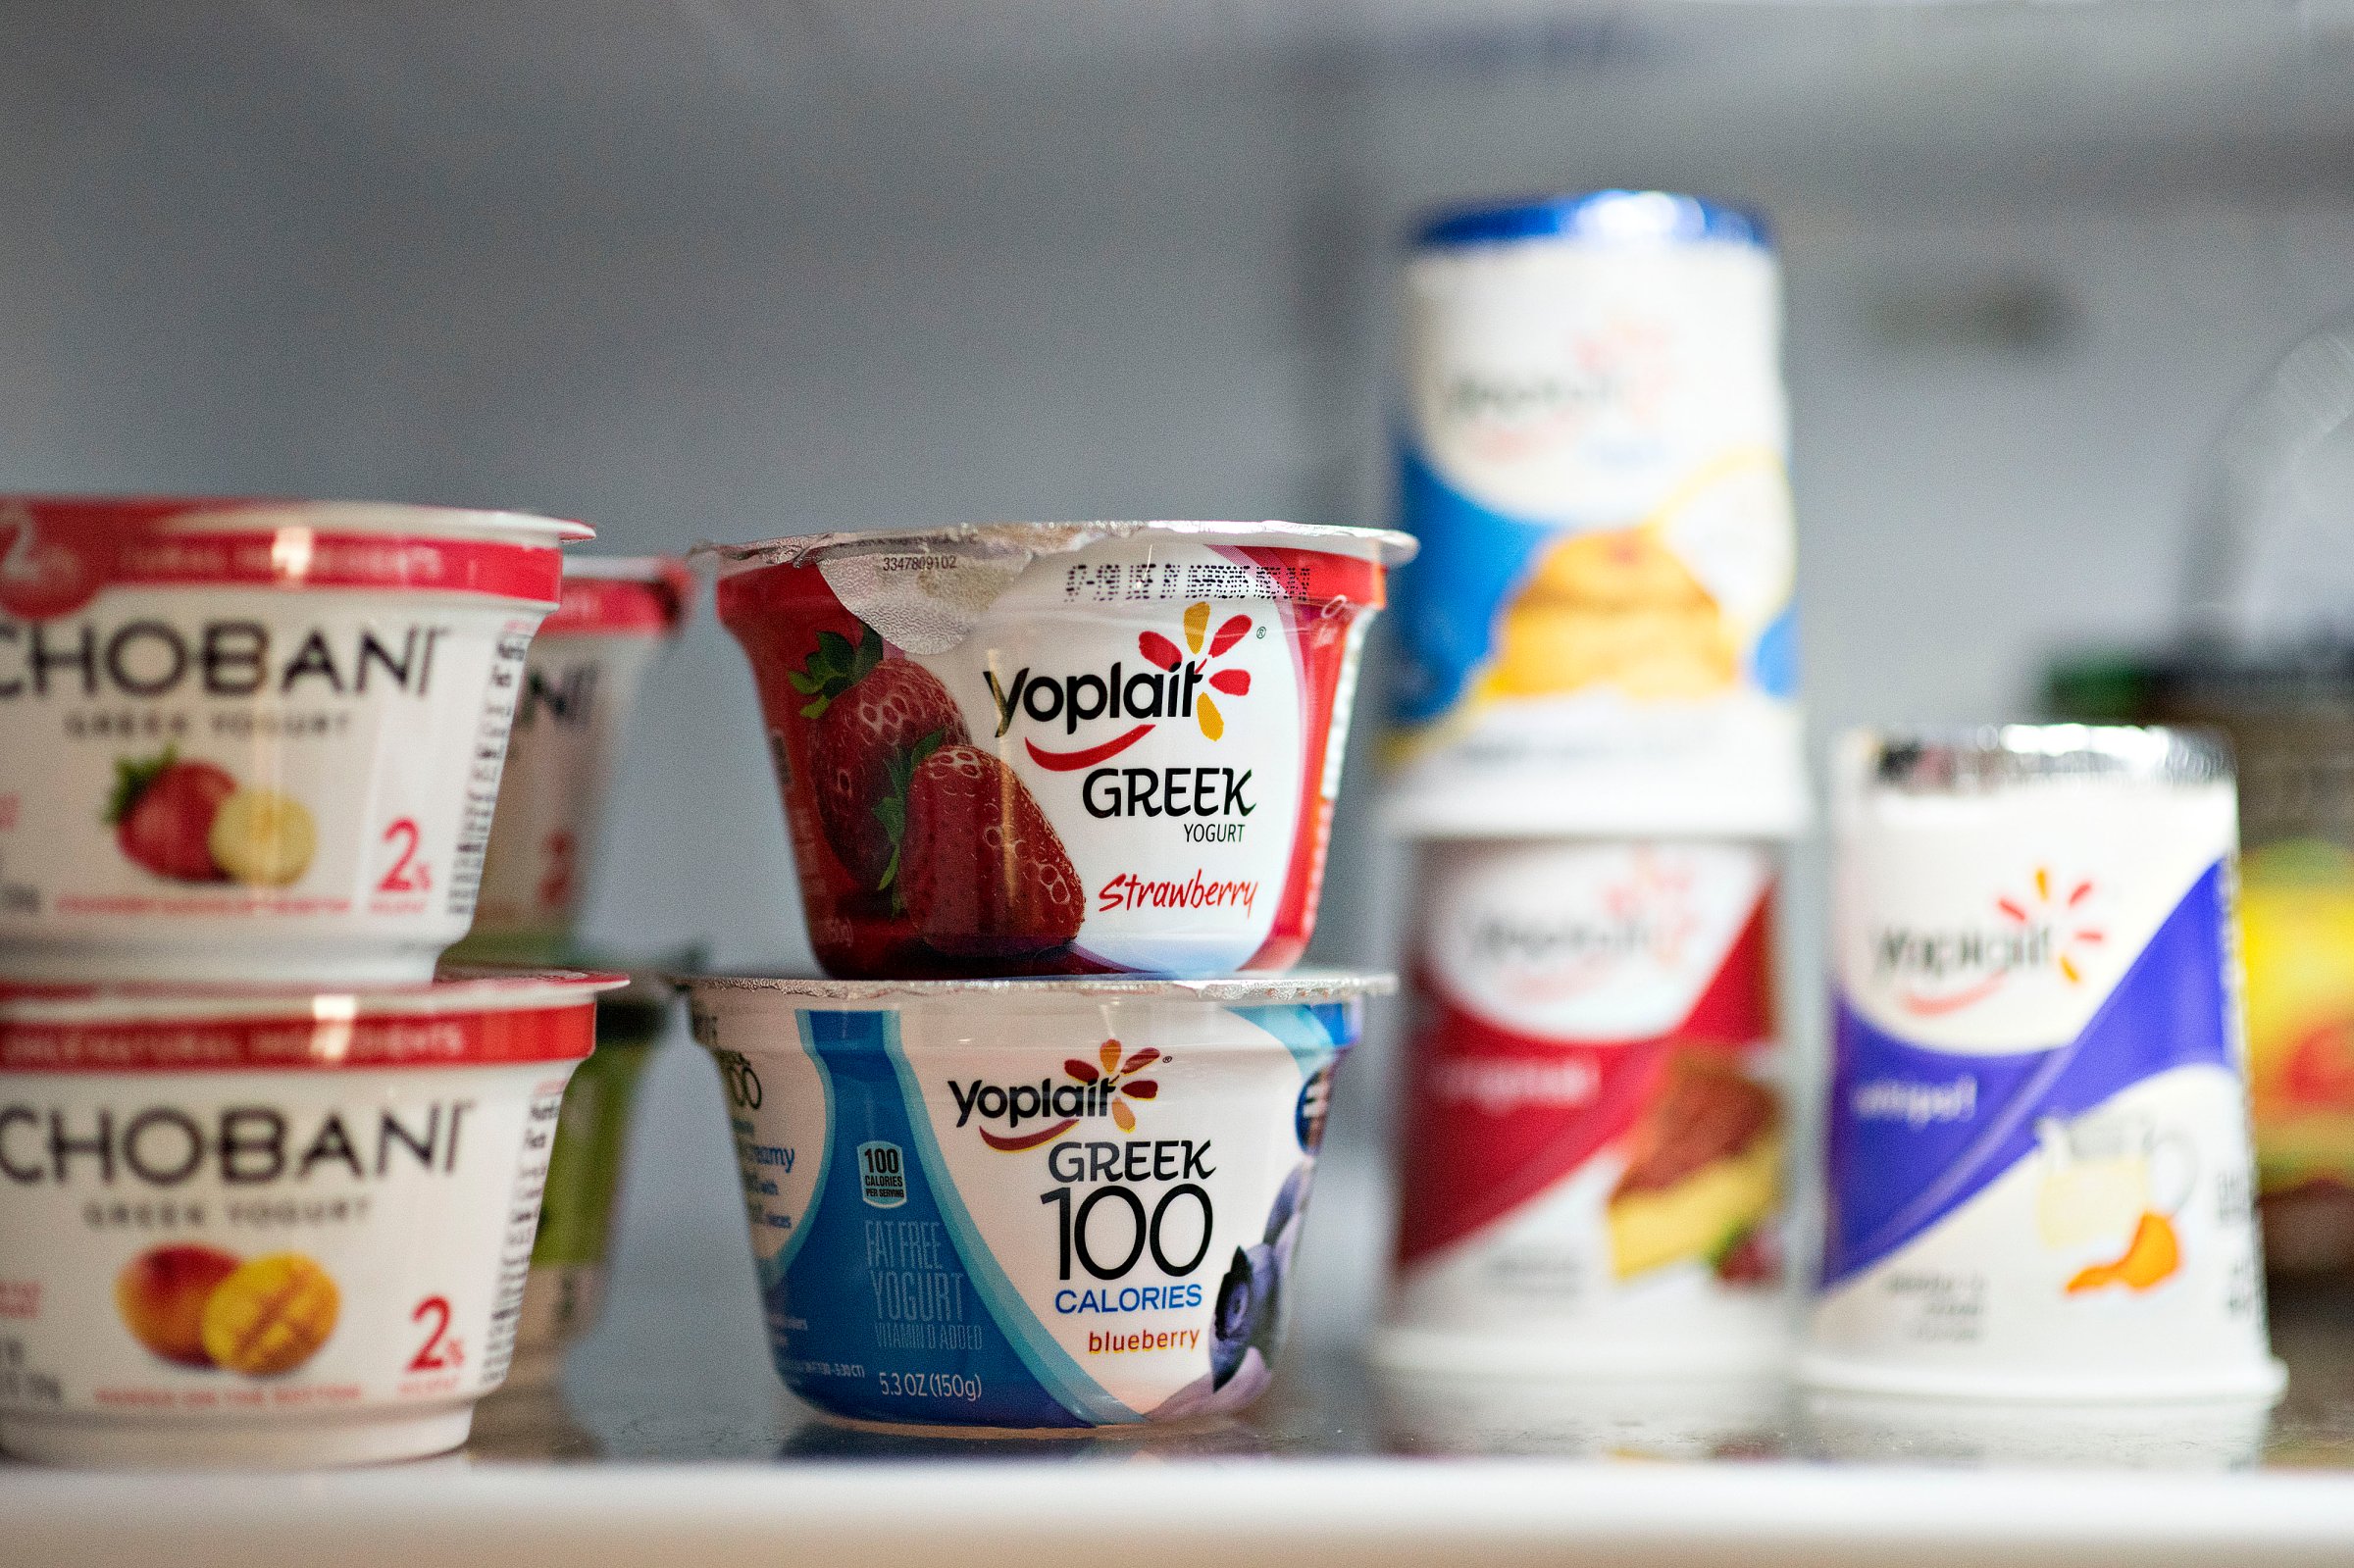 General Mills Inc. Yoplait brand yogurt products arranged for a photograph in Tiskilwa, Illinois, U.S., on Wednesday, March 18, 2015.